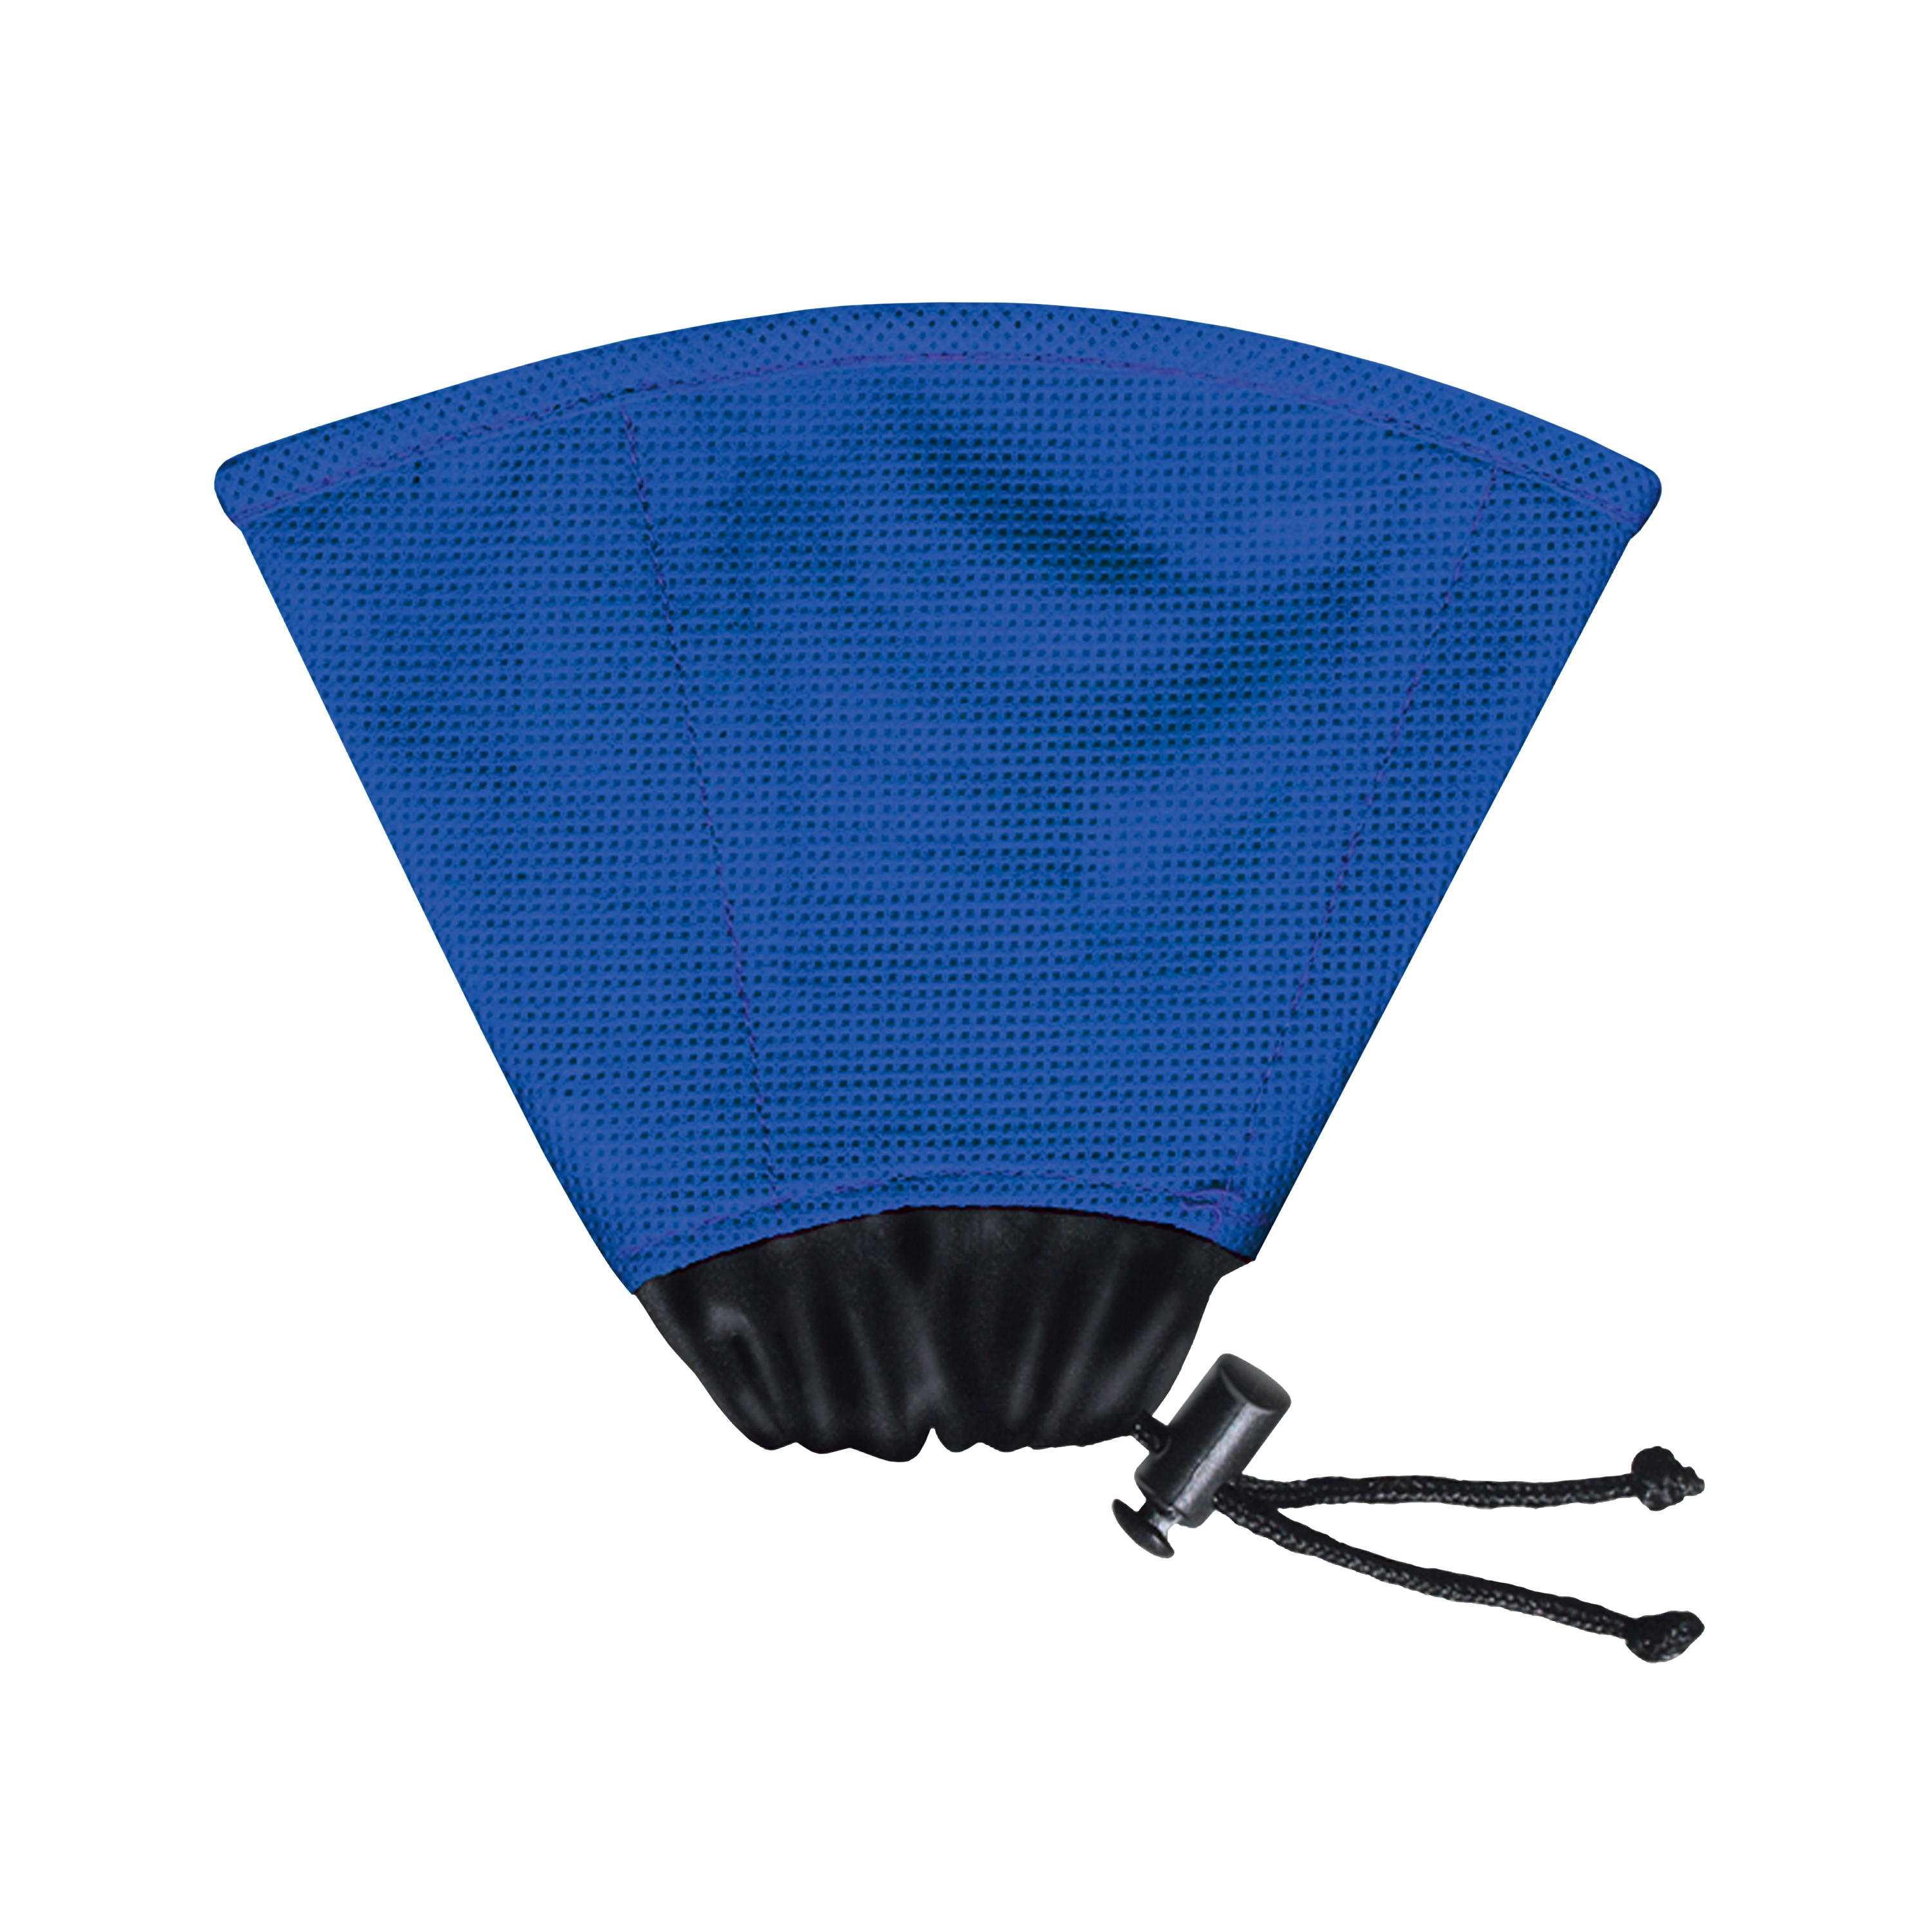 E-Collar EZ Soft offpack product image